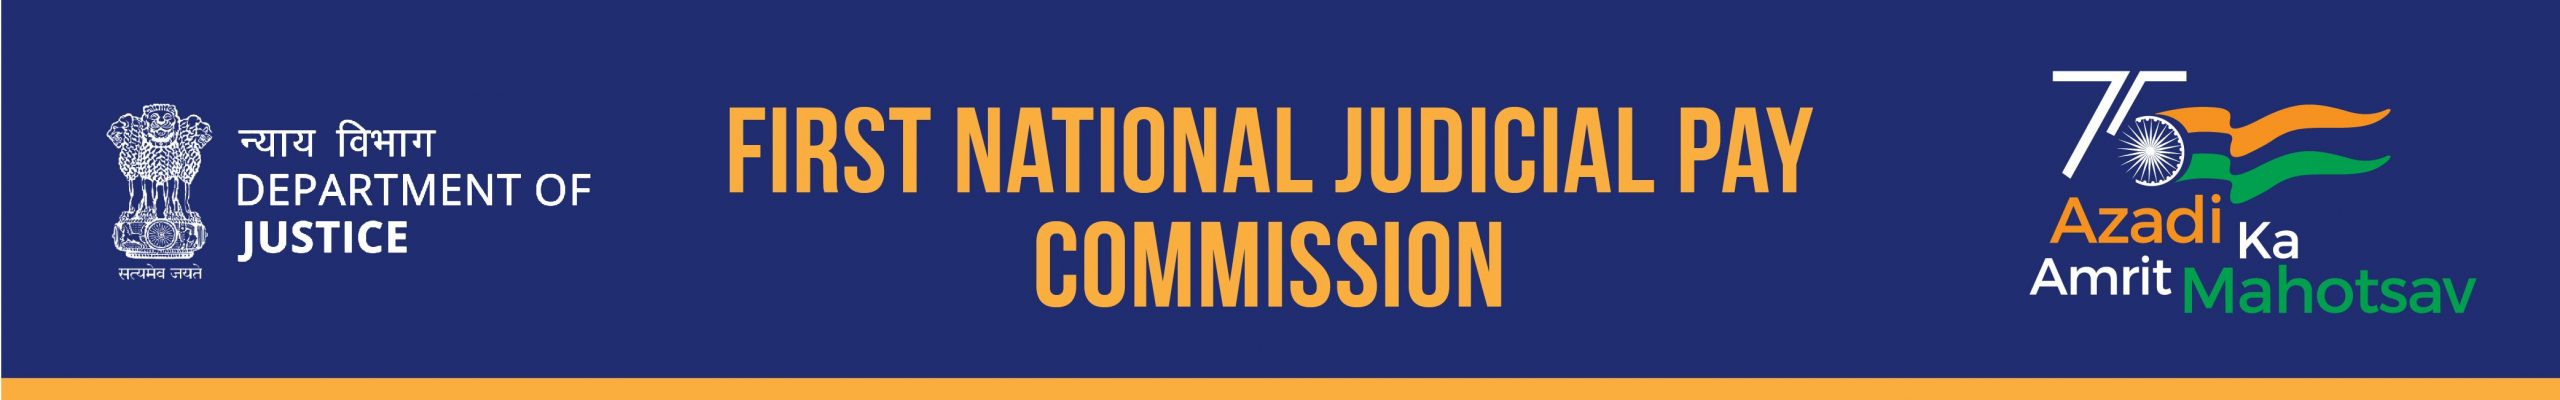 First National Judicial Pay Commission